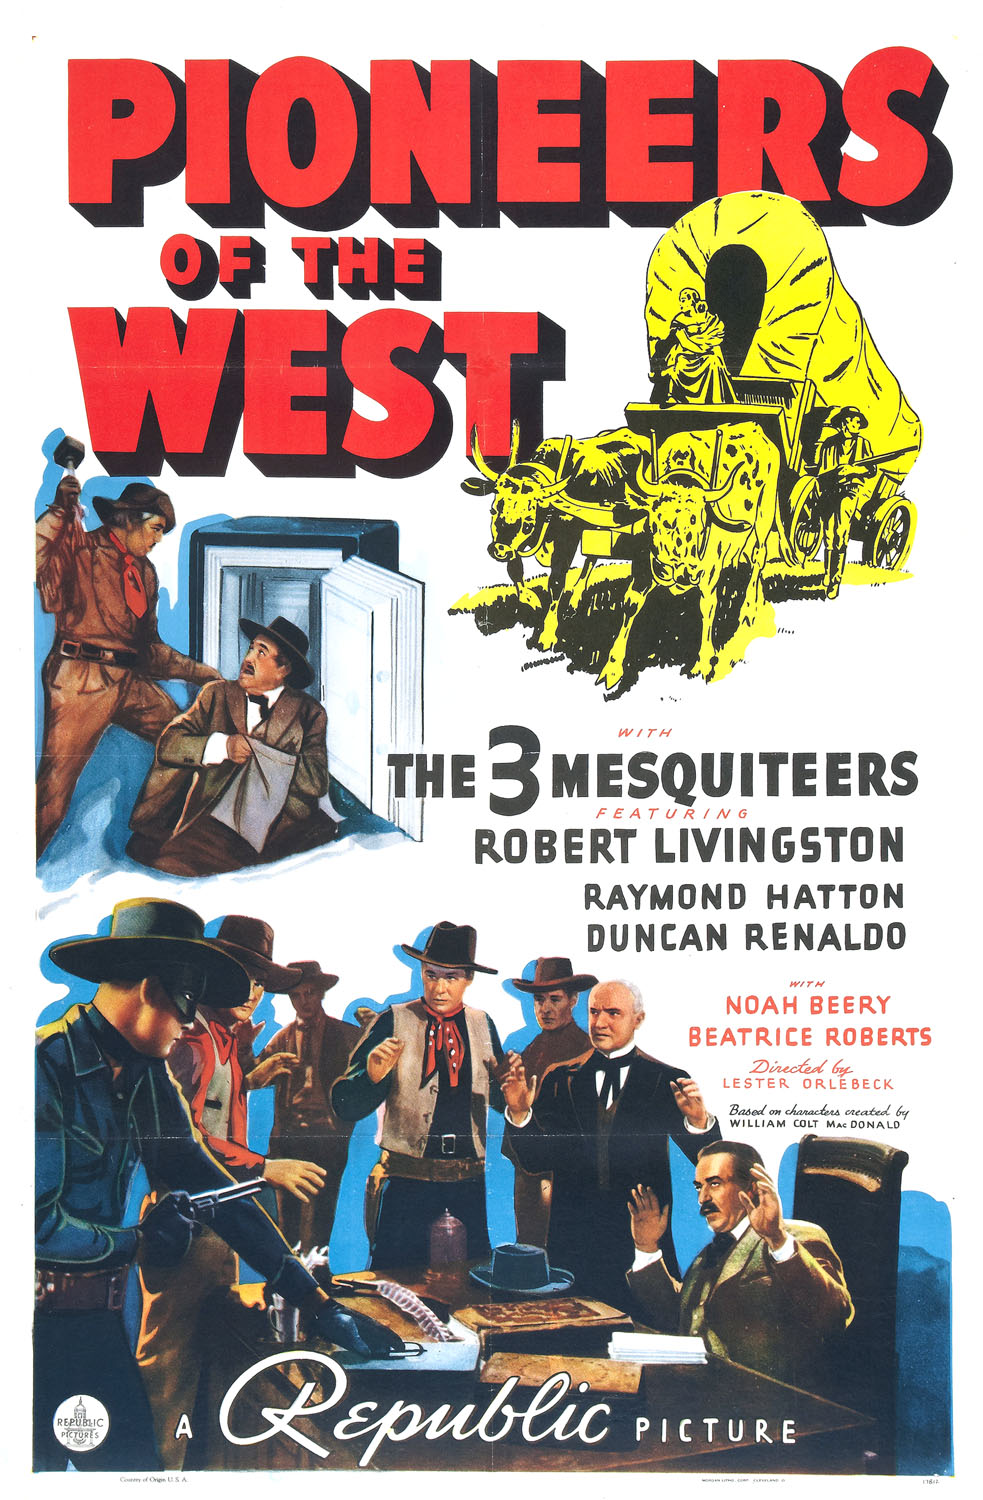 PIONEERS OF THE WEST